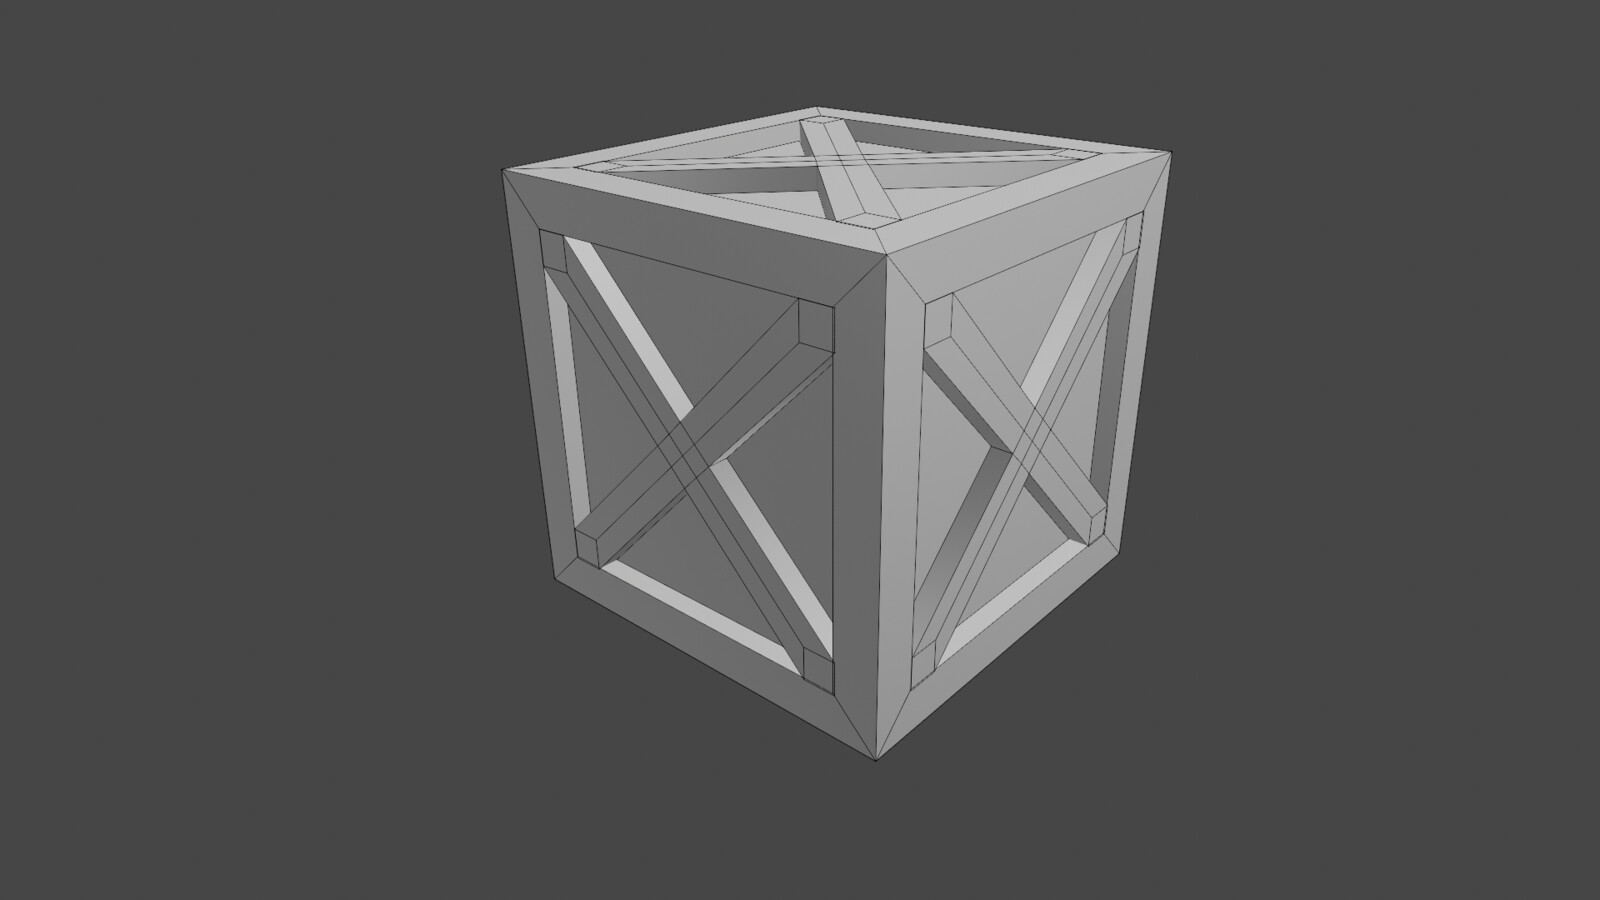 Wooden Crate 2 Wireframe